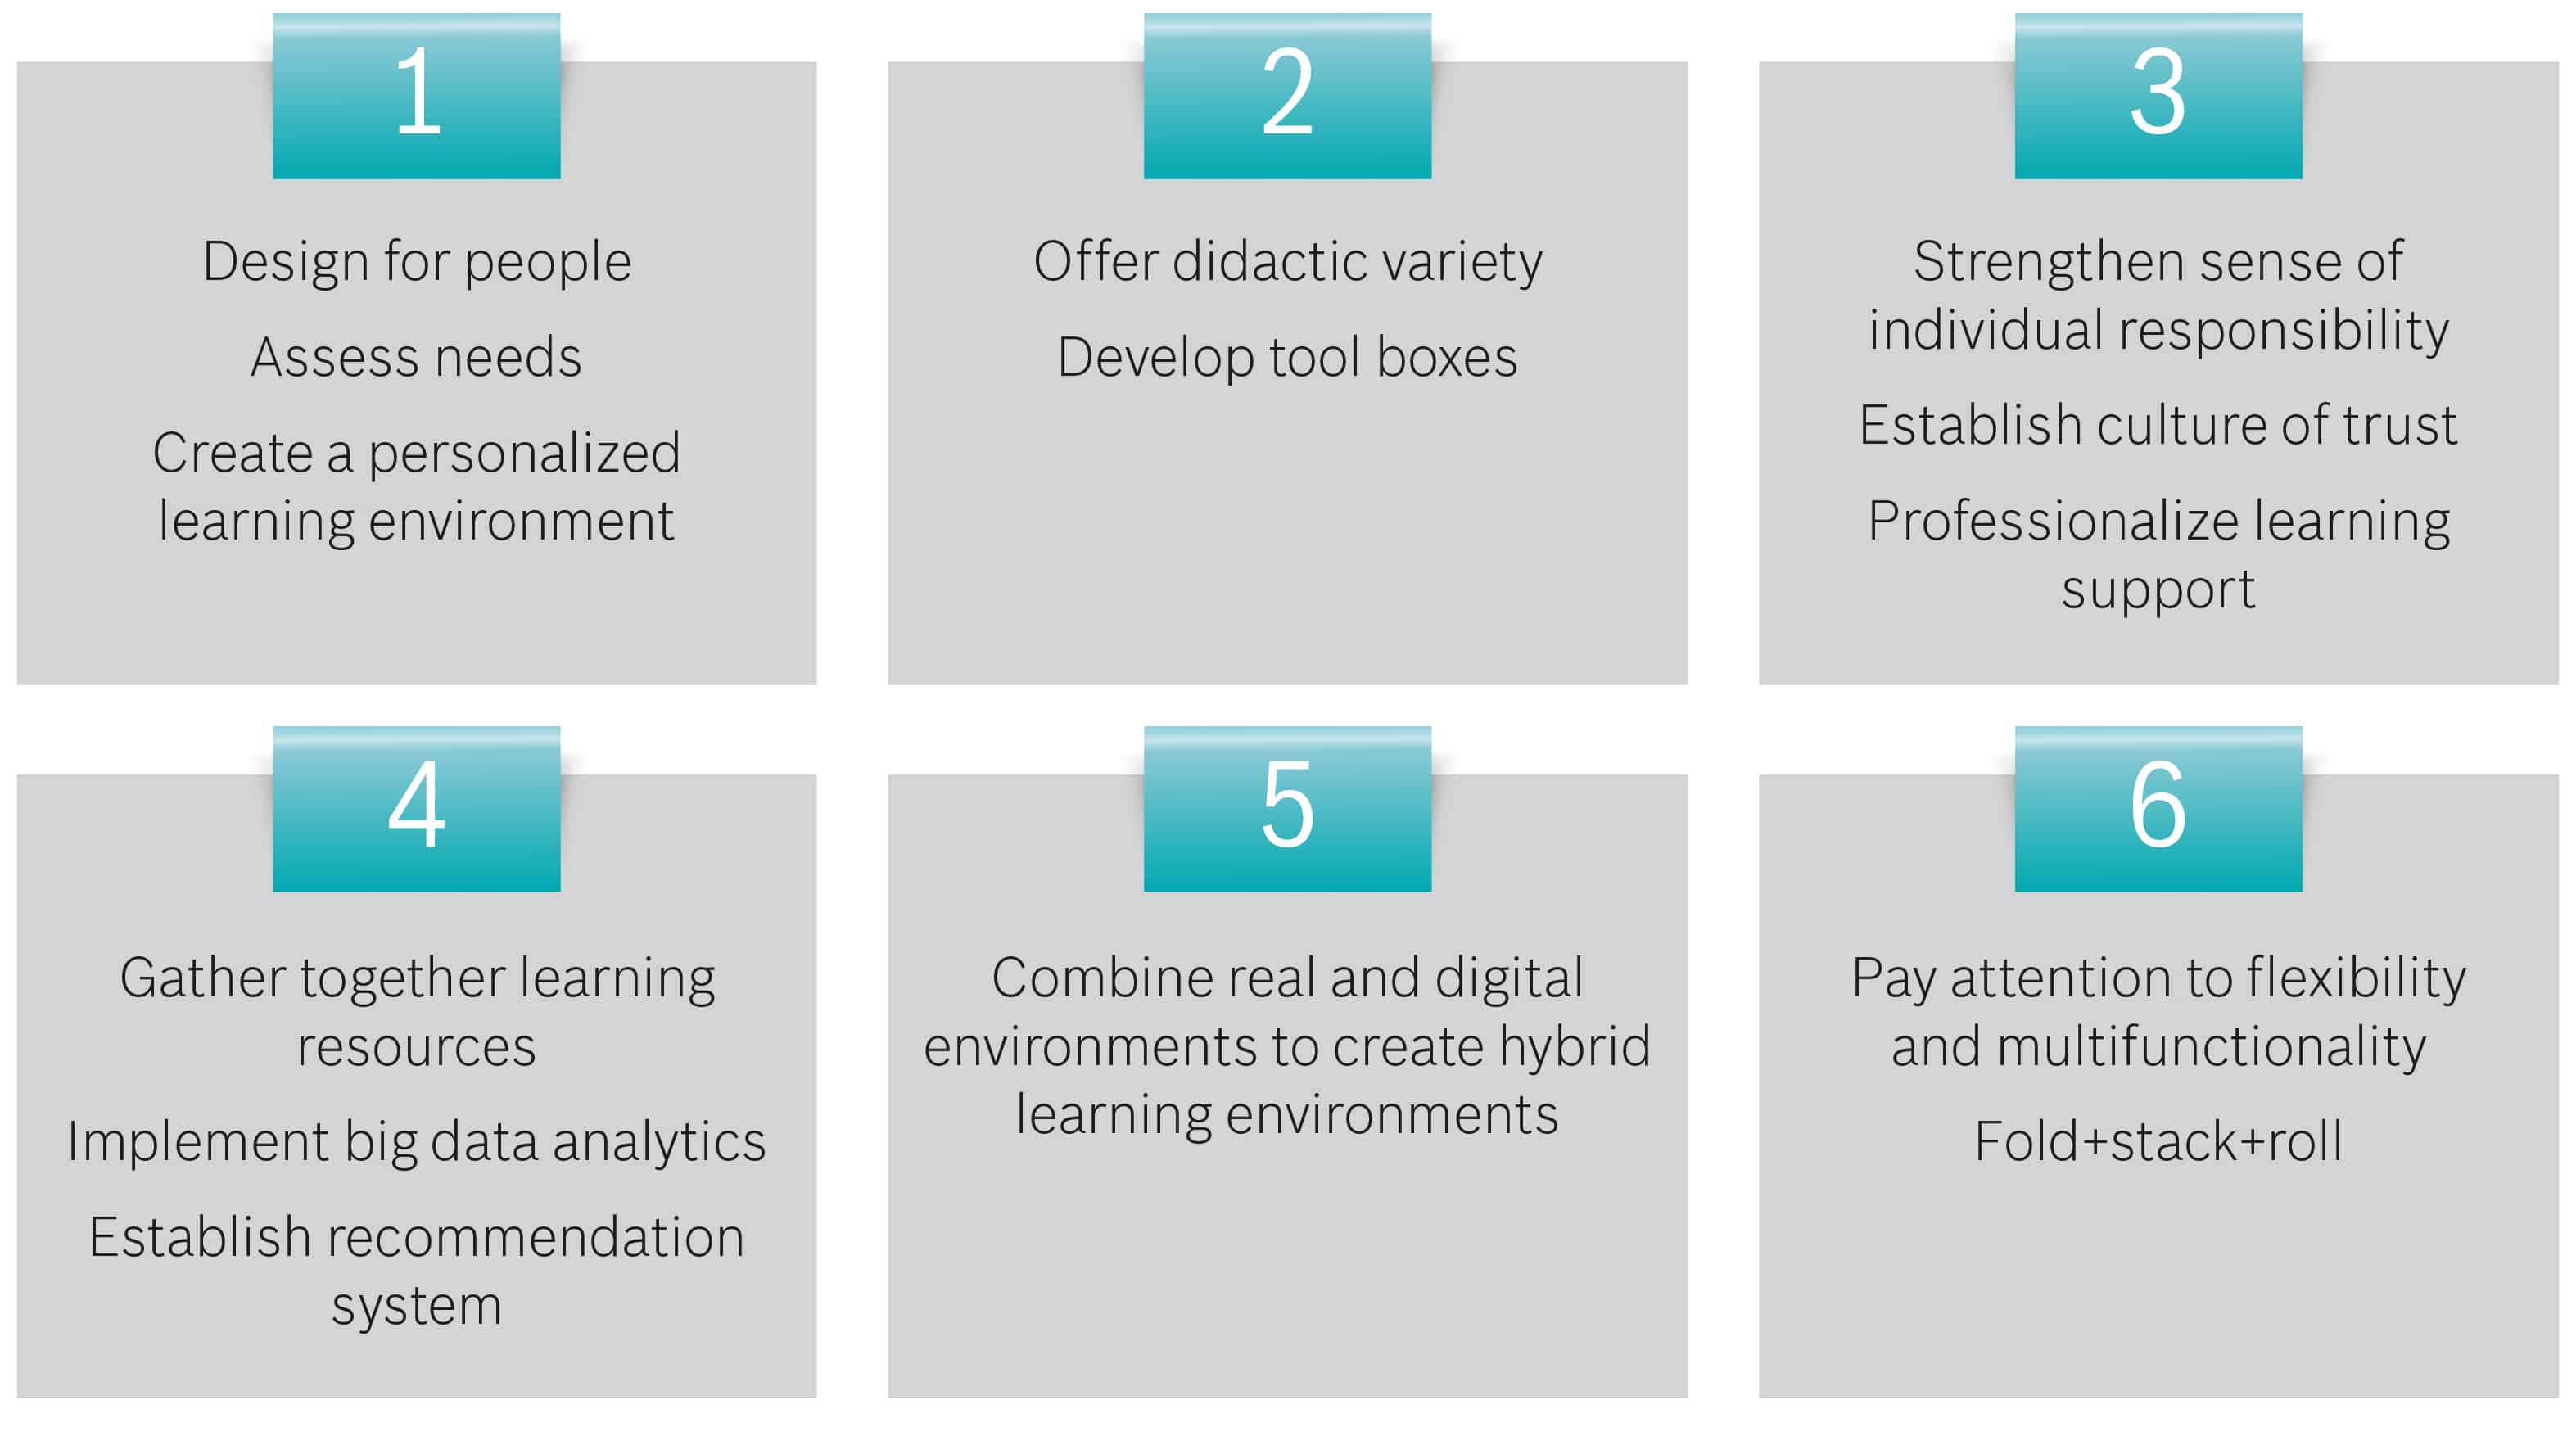 Infographic showing 6 key areas for using IoT in education.